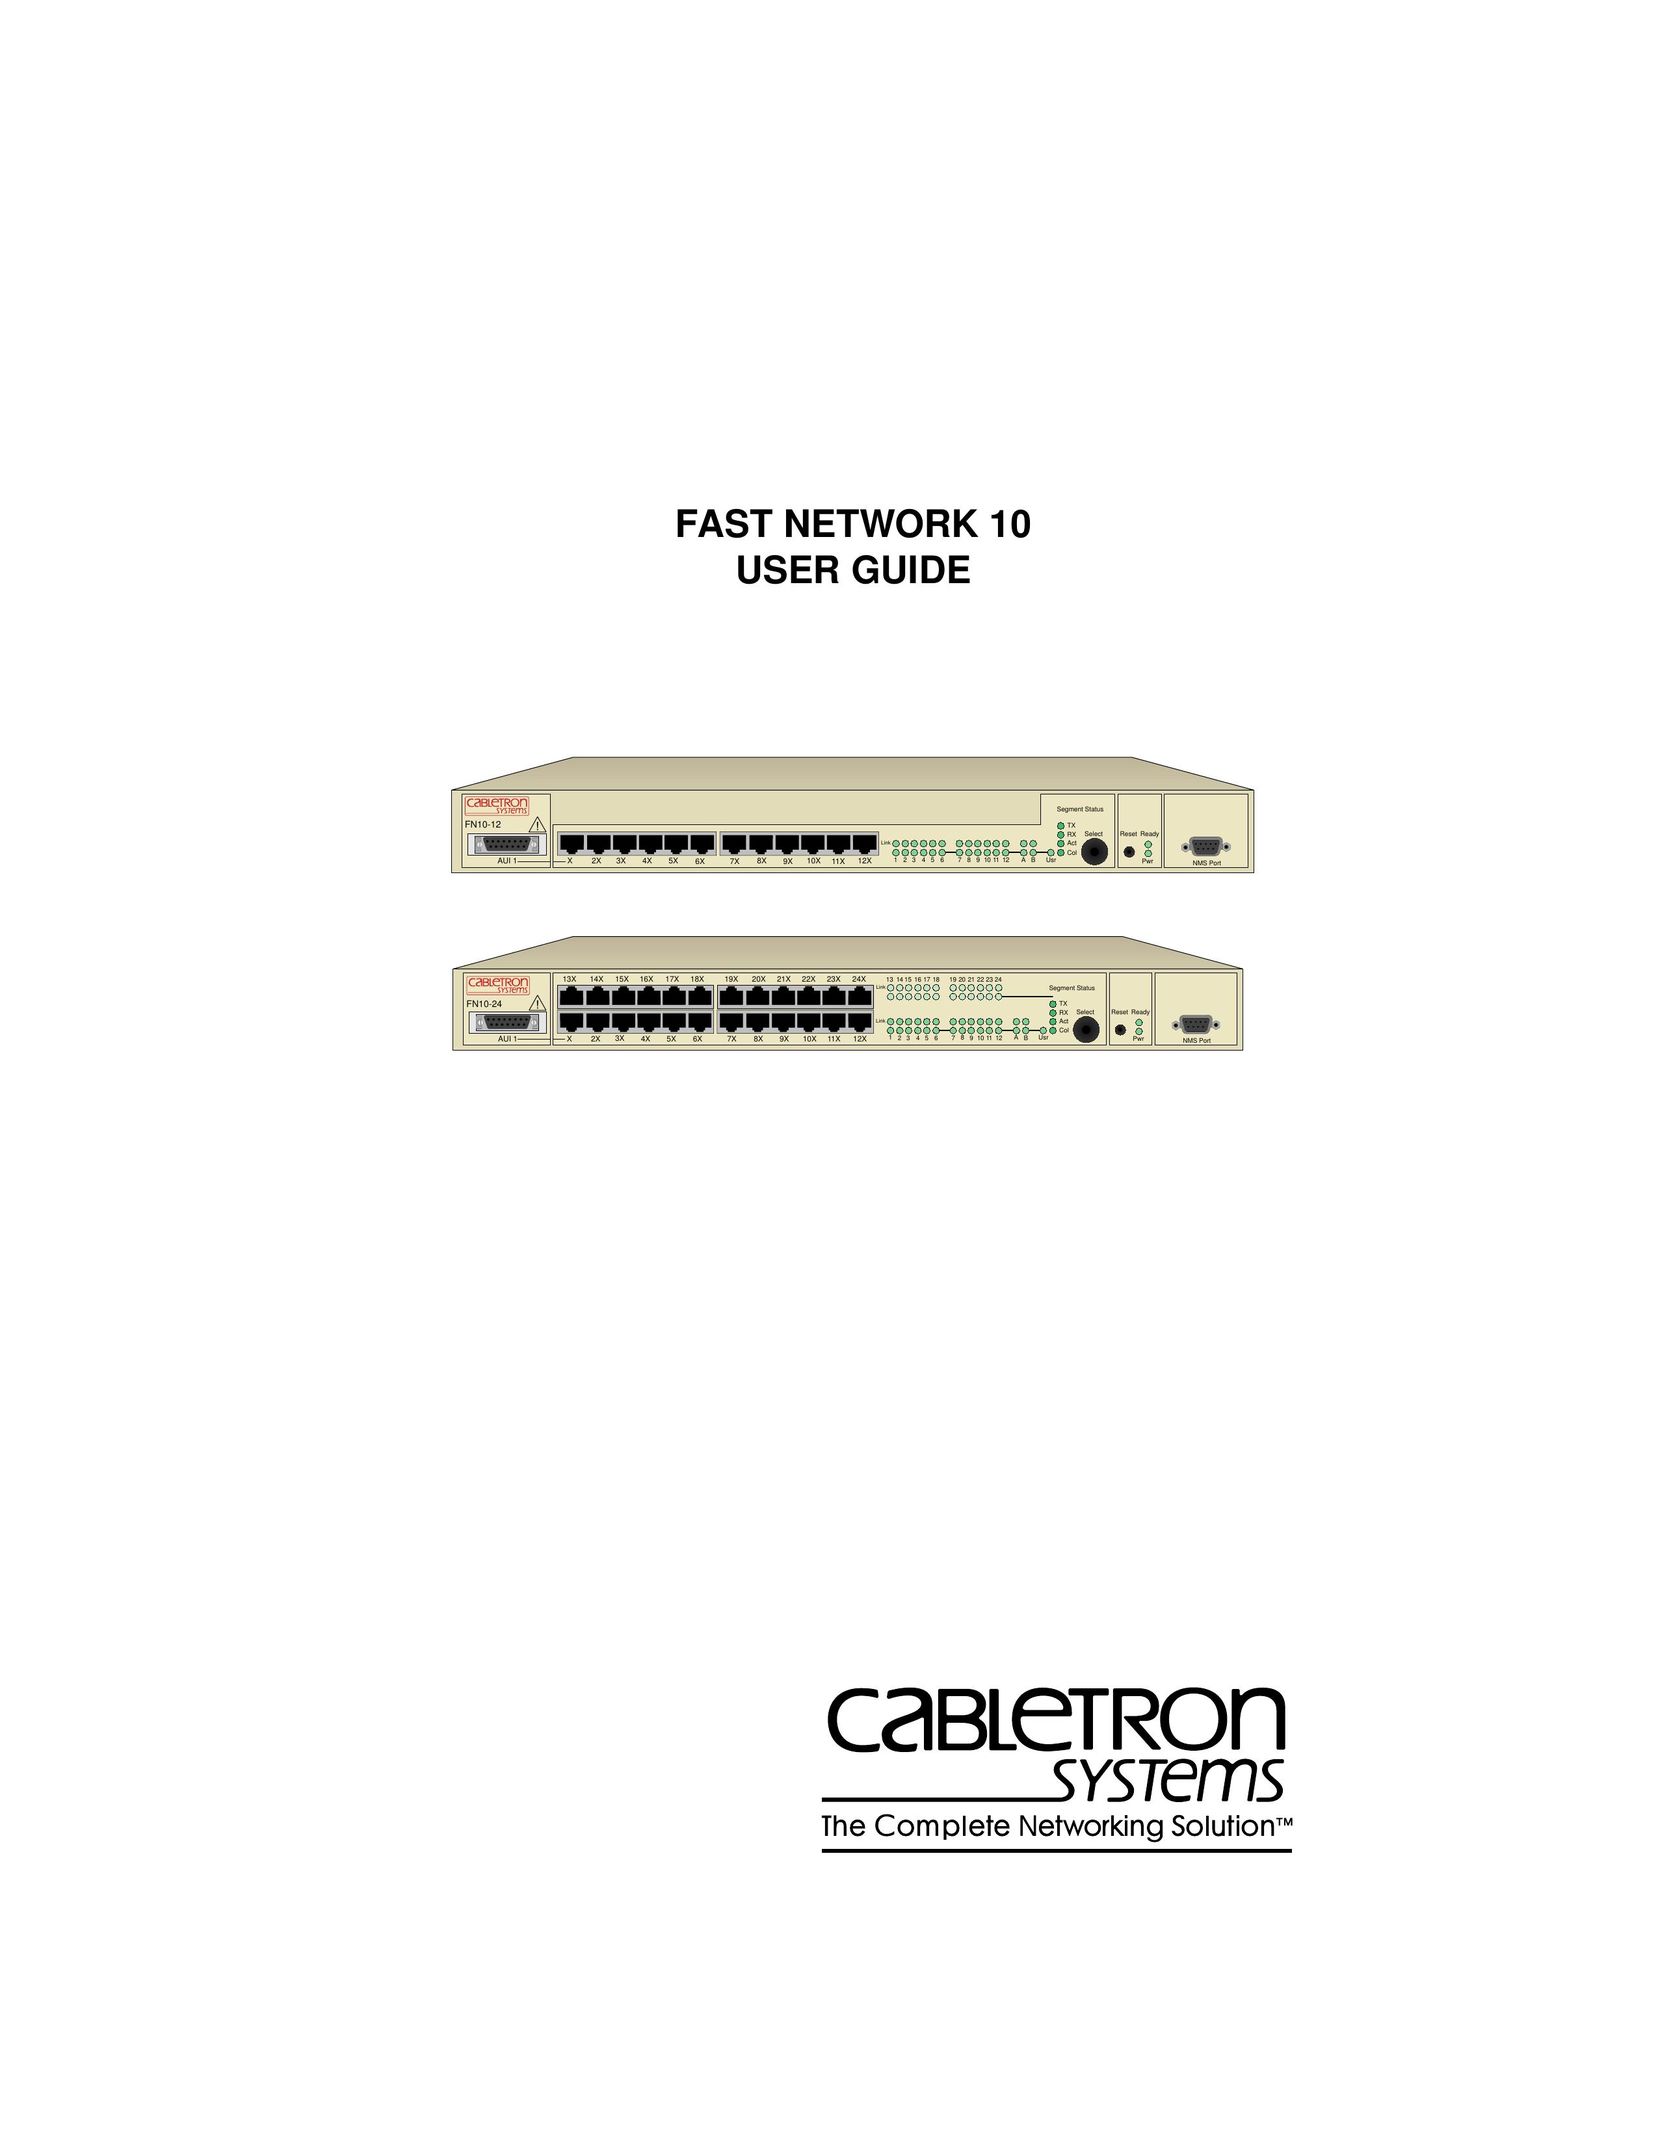 Enterasys Networks Fast Network 10 Network Card User Manual